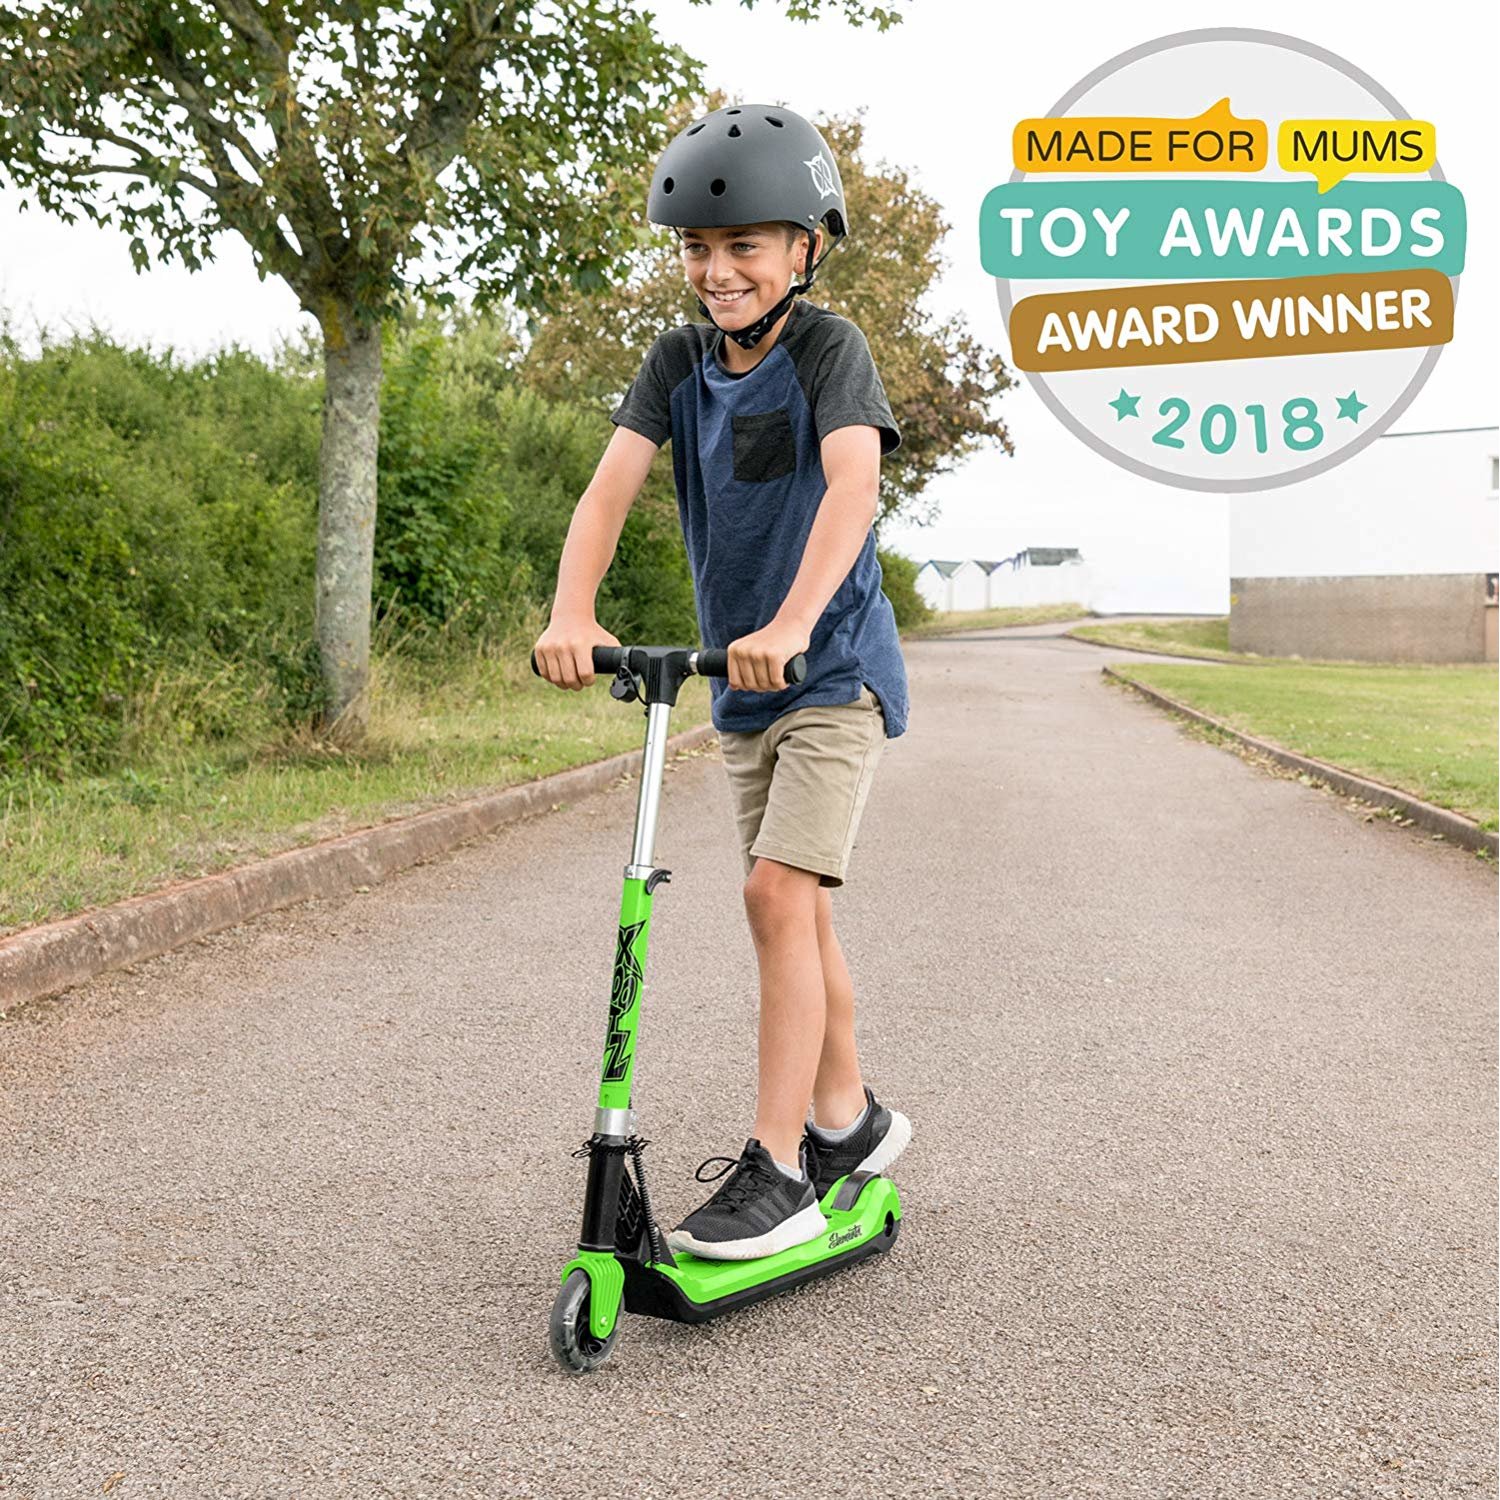 Xootz Kids Elements Electric Folding Scooter with LED - Green